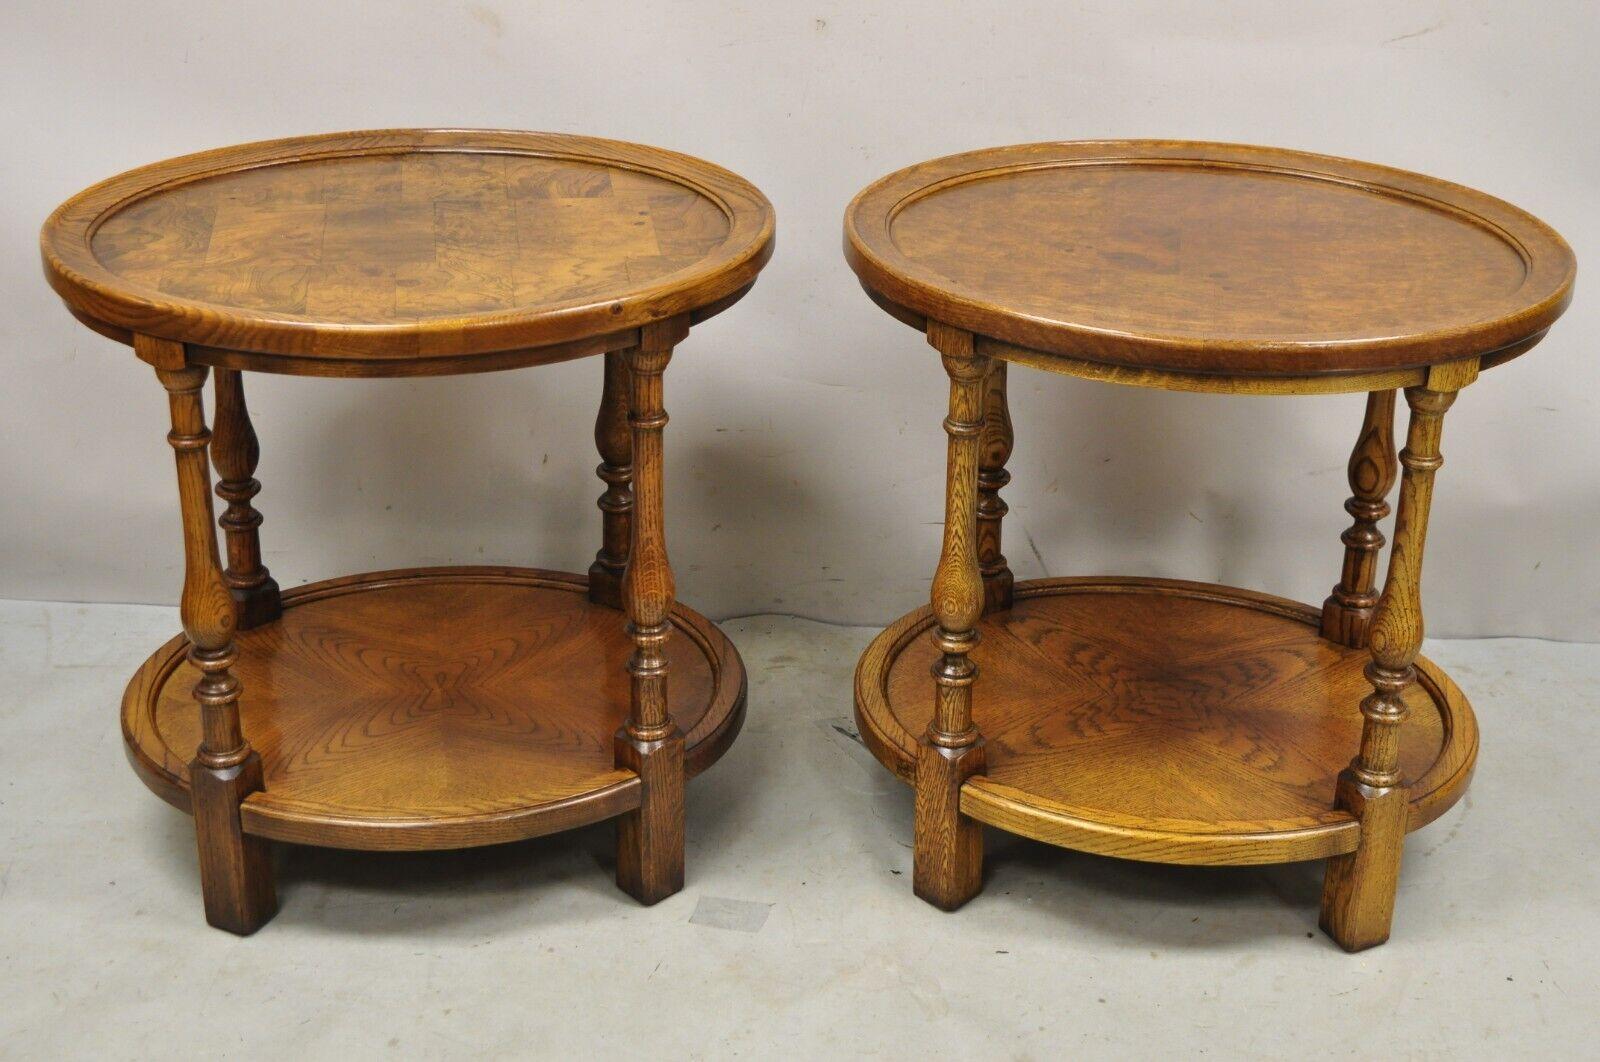 Vintage Hekman Italian Provincial Style Oak & Burlwood Two Tier Oval End Tables - a Pair. Circa Mid to Late 20th Century. 
Measurements: 25